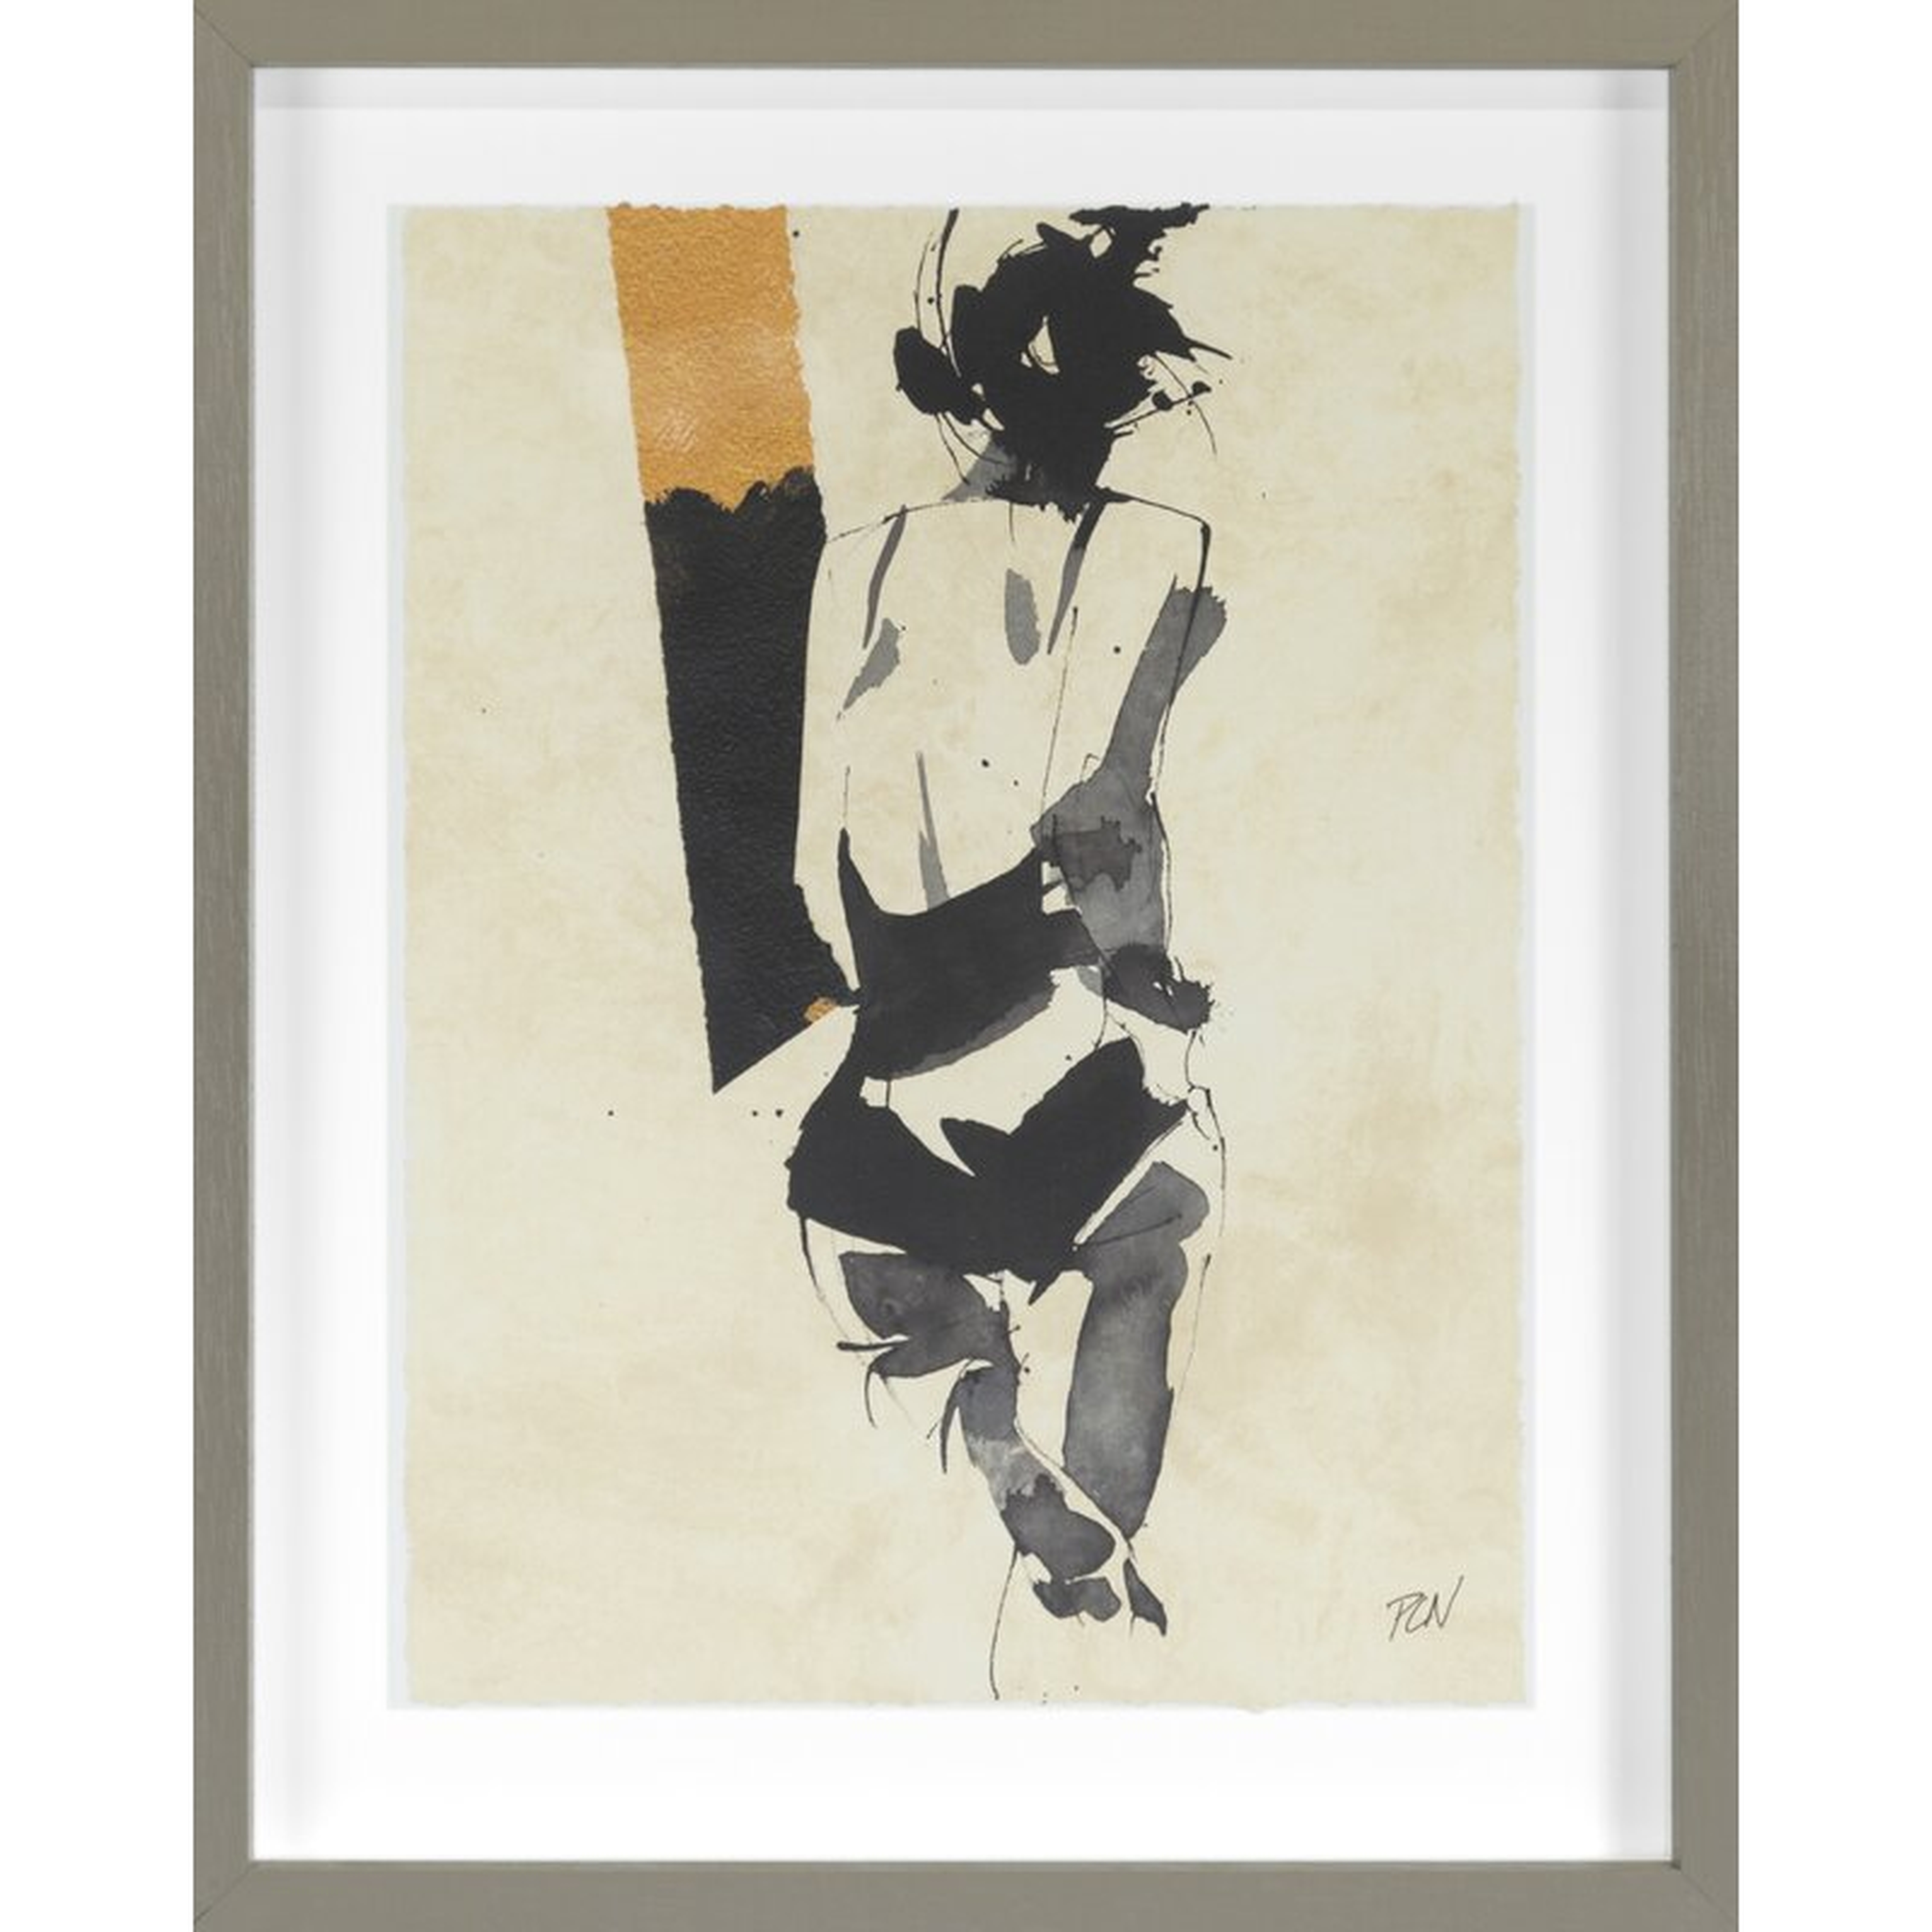 Grand Image Home 'Y-Nudes I' by PC Ngo - Picture Frame Print on Paper Size: 29" H x 23" W x 2" D - Perigold